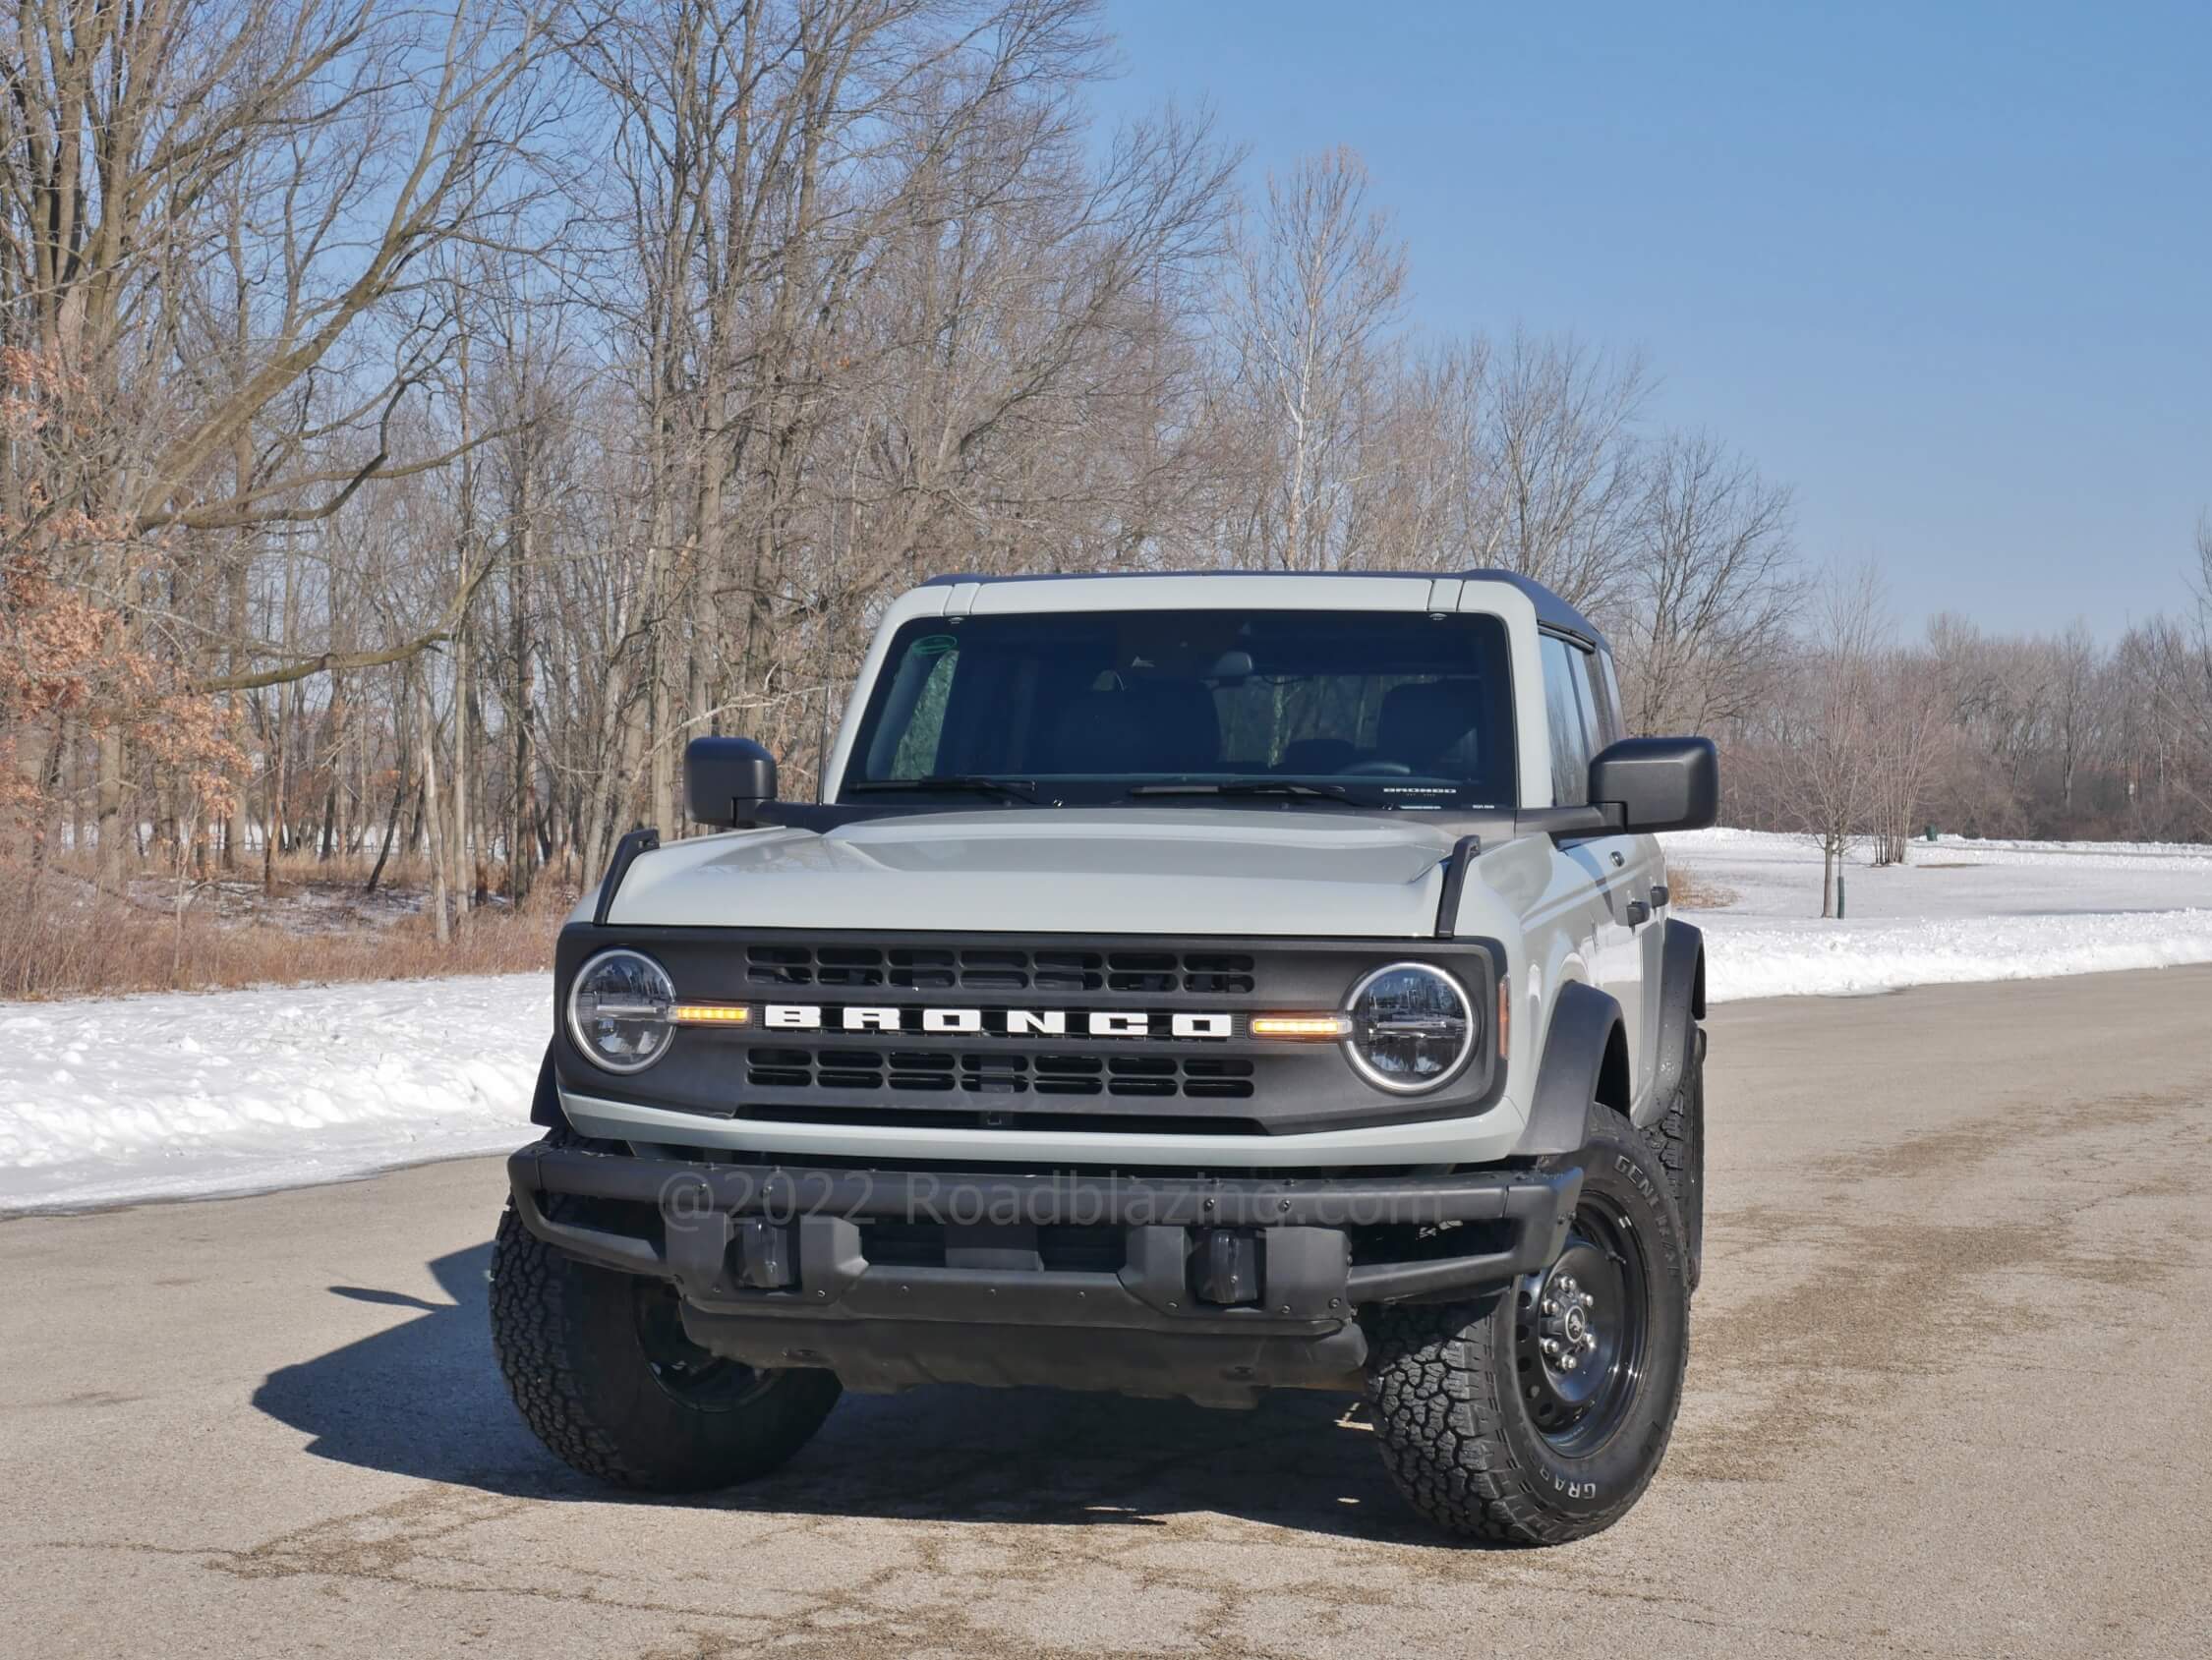 2021 Ford Bronco 4-Door Black Diamond 4x4 2.3T: heritage Bronco nose is modernized with LED DRL bisected round LED projector headlamps